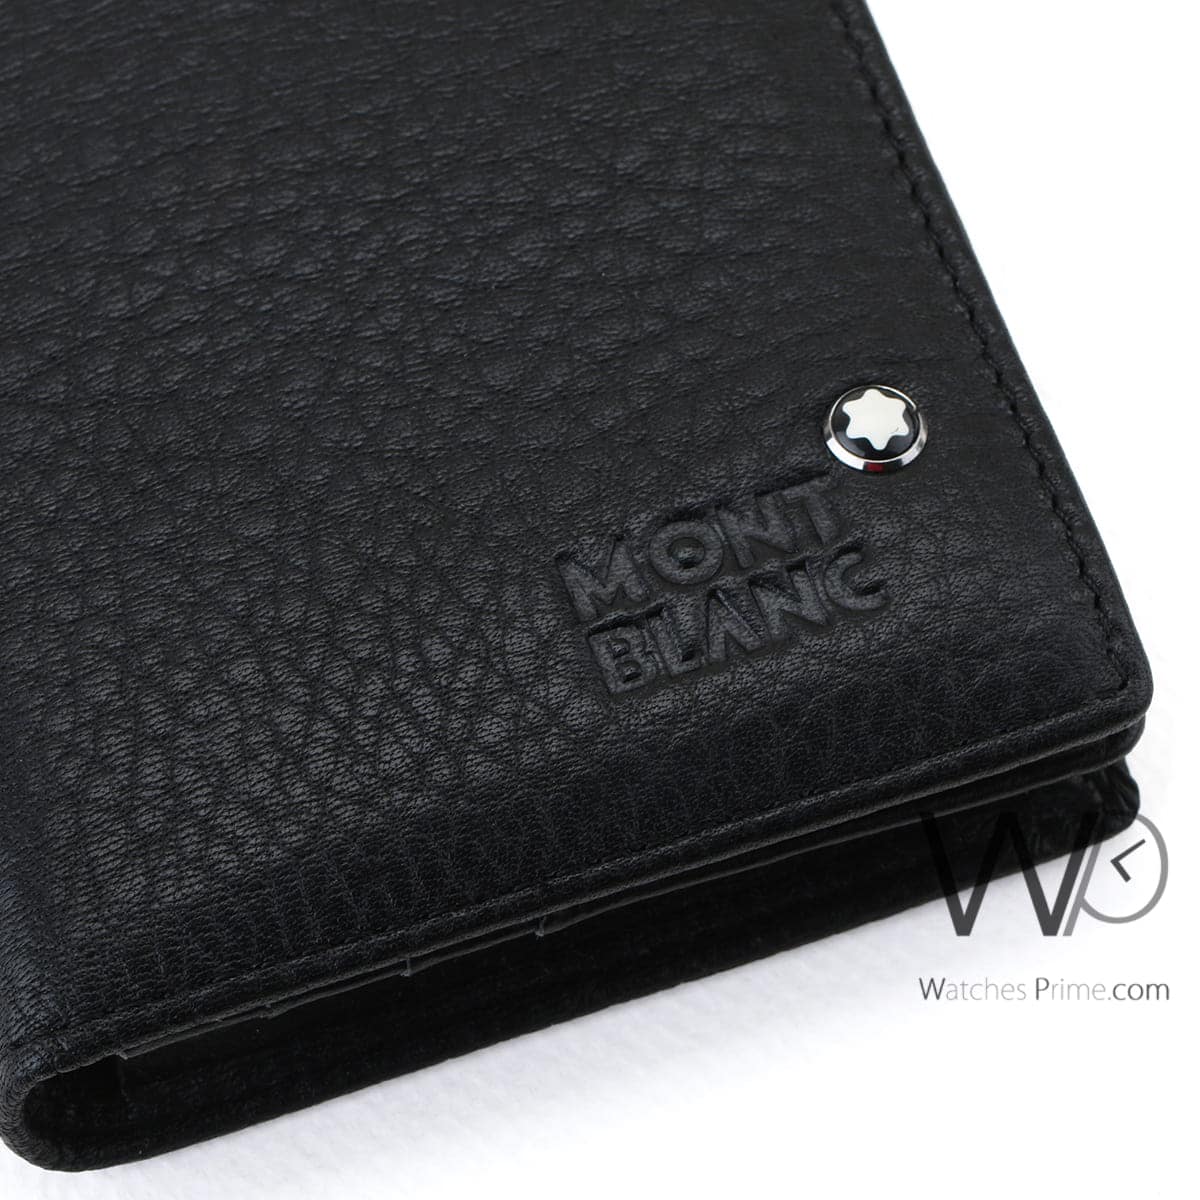 Montblanc Long Wallet Black Leather For Men | Watches Prime